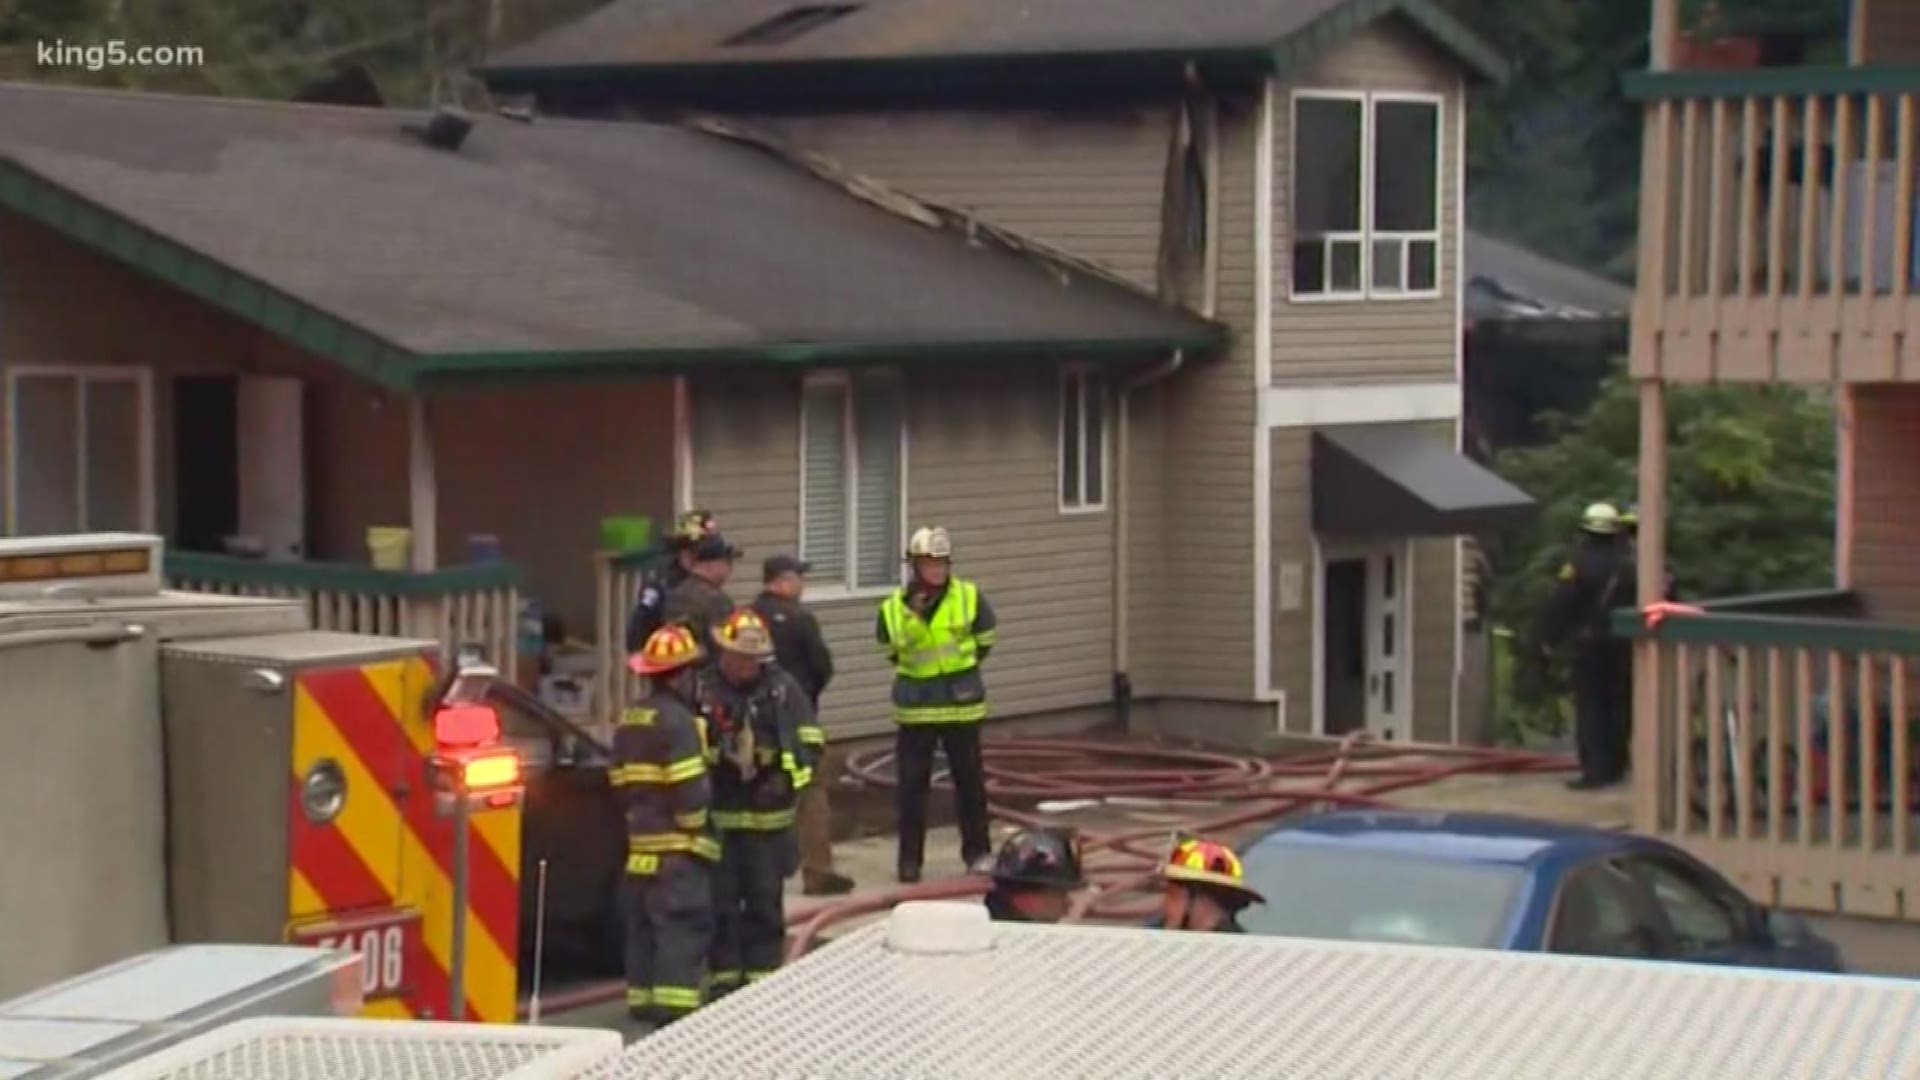 One person had to be taken to Harborview Medical Center after a house fire in Bellevue early Saturday morning.